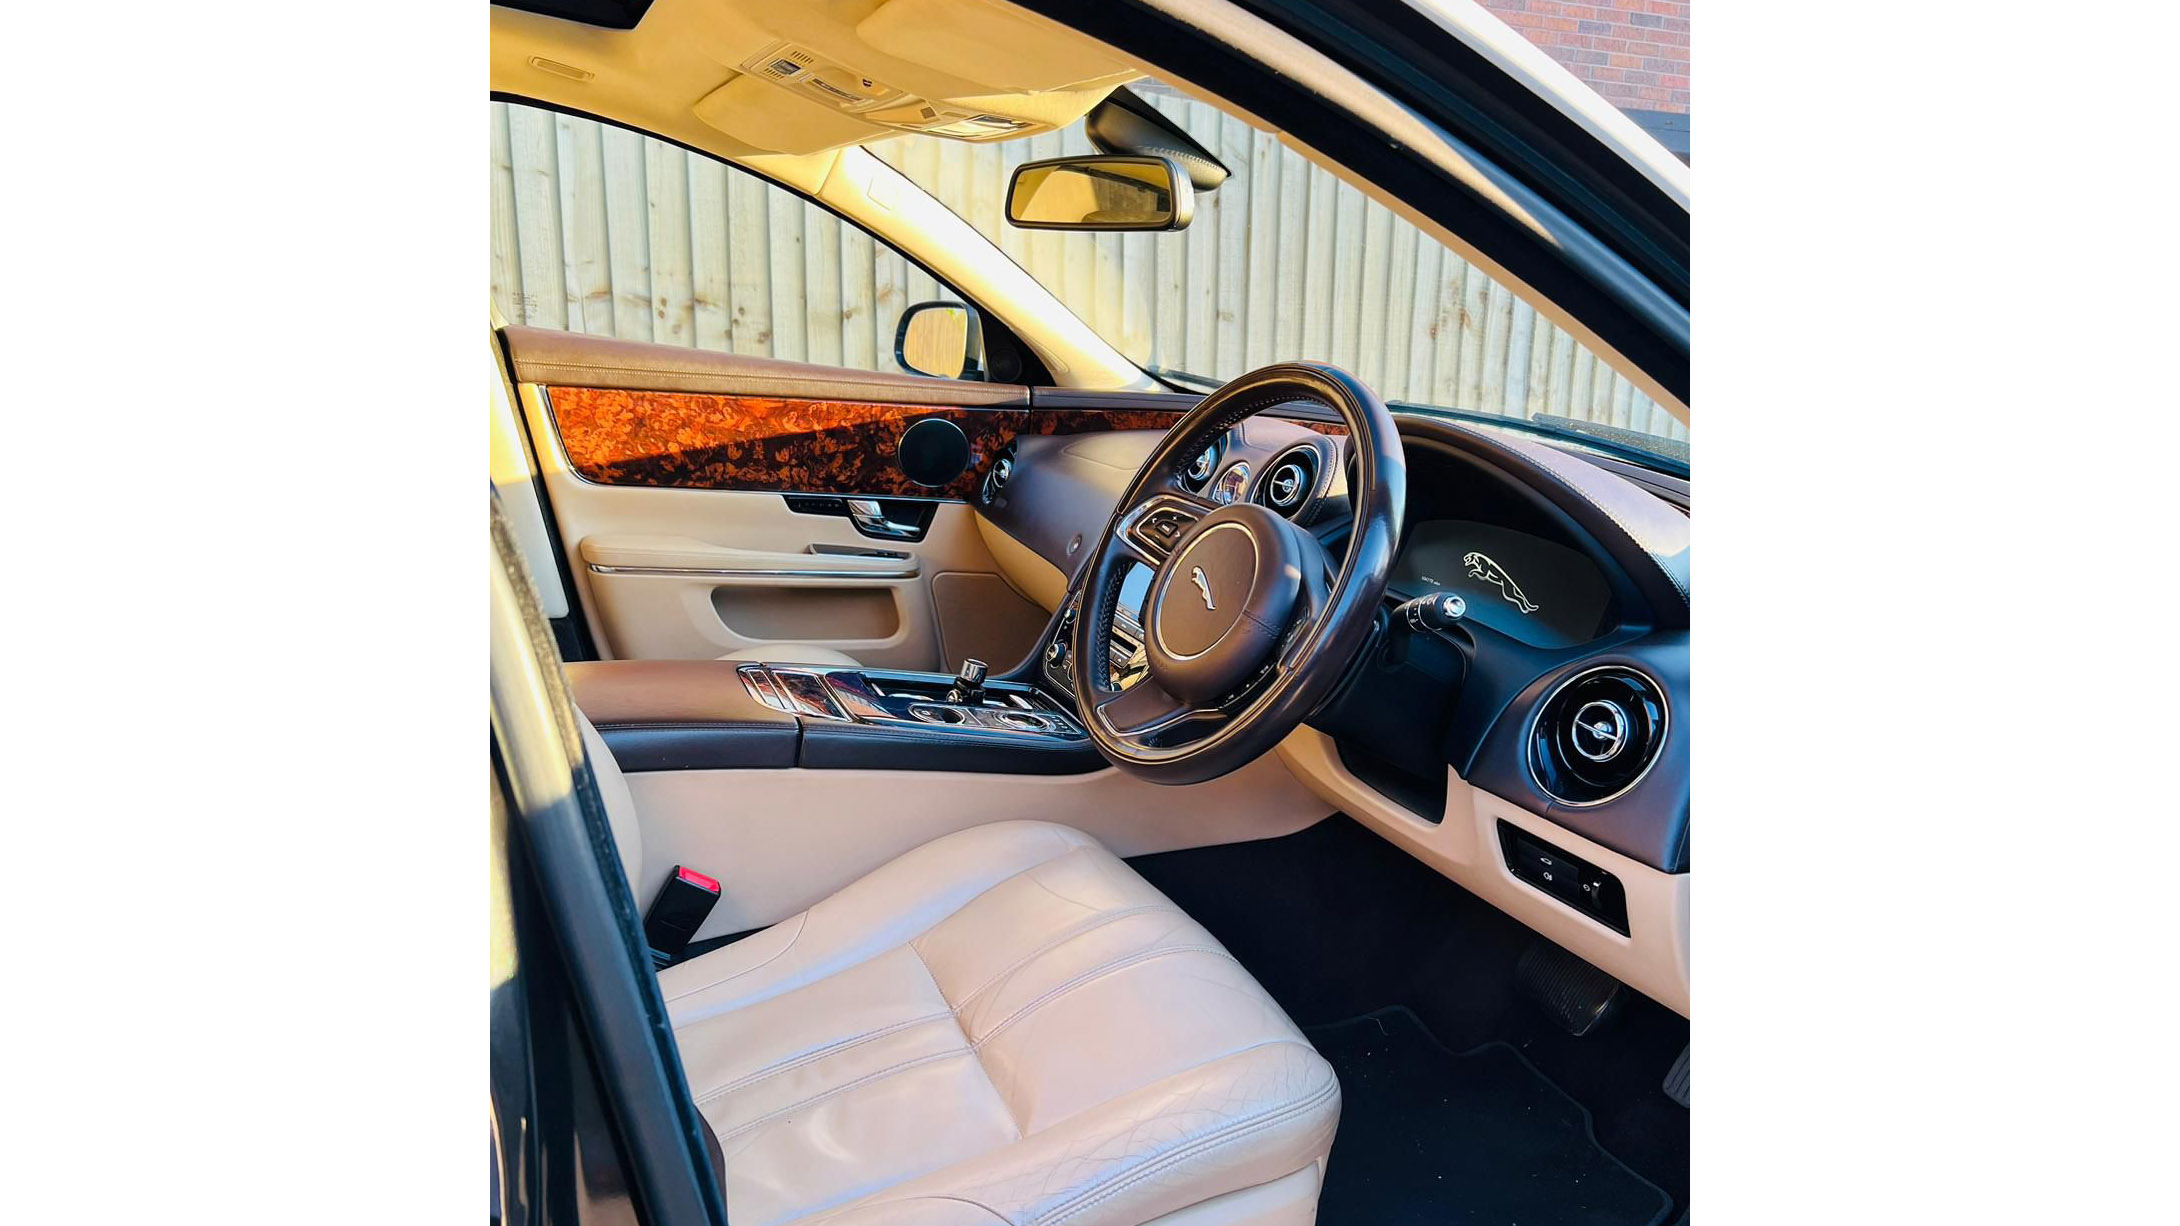 Front seating area in a White Jaguar showing the Cream Leather interior, Steering wheel and wood on top of the door cards.